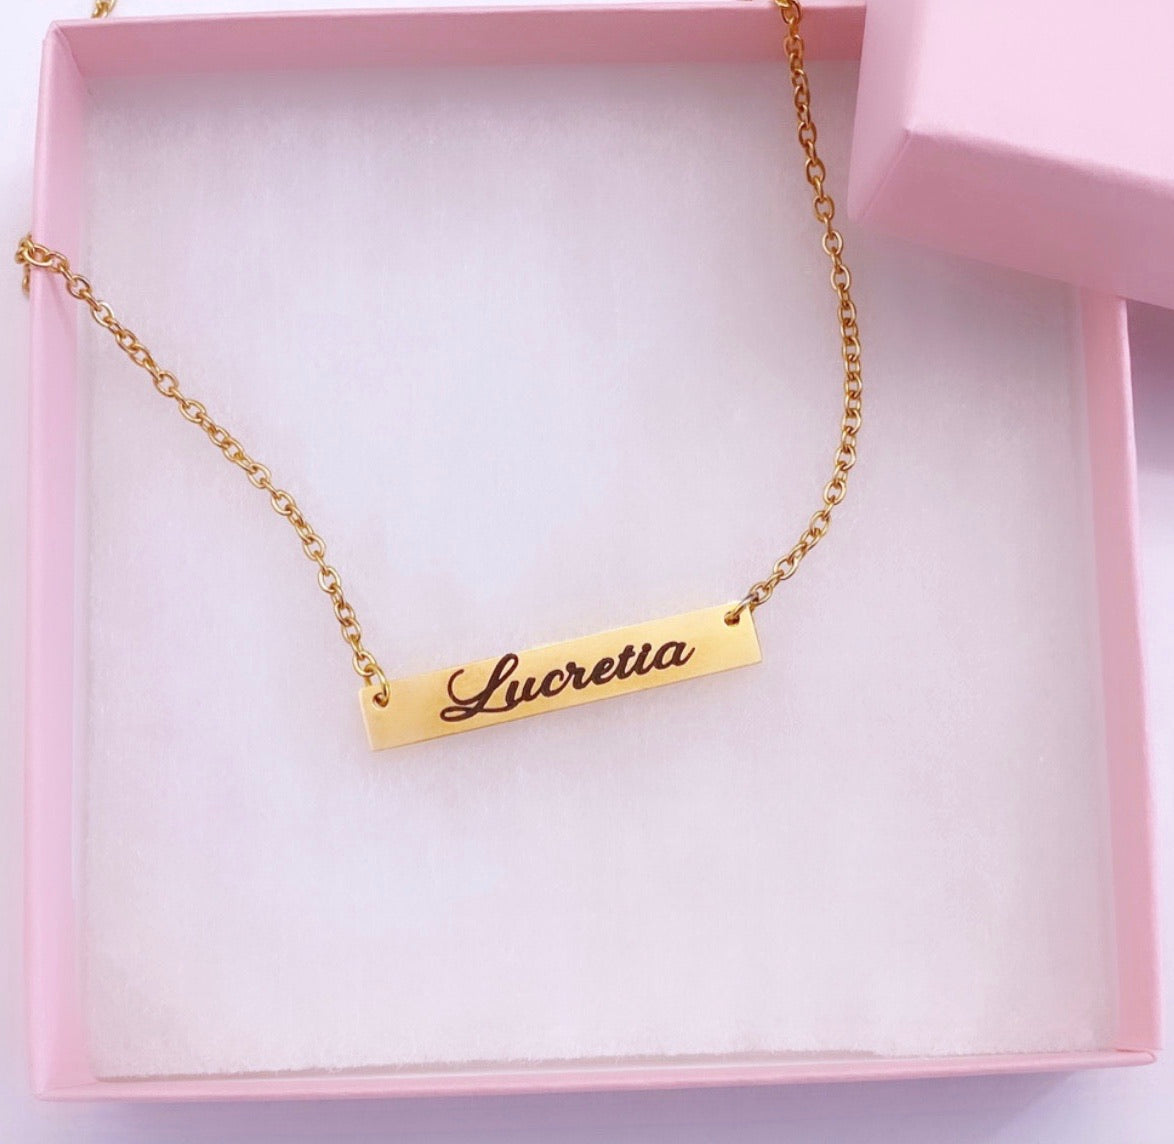 Personalized gold engraved nameplate necklace.